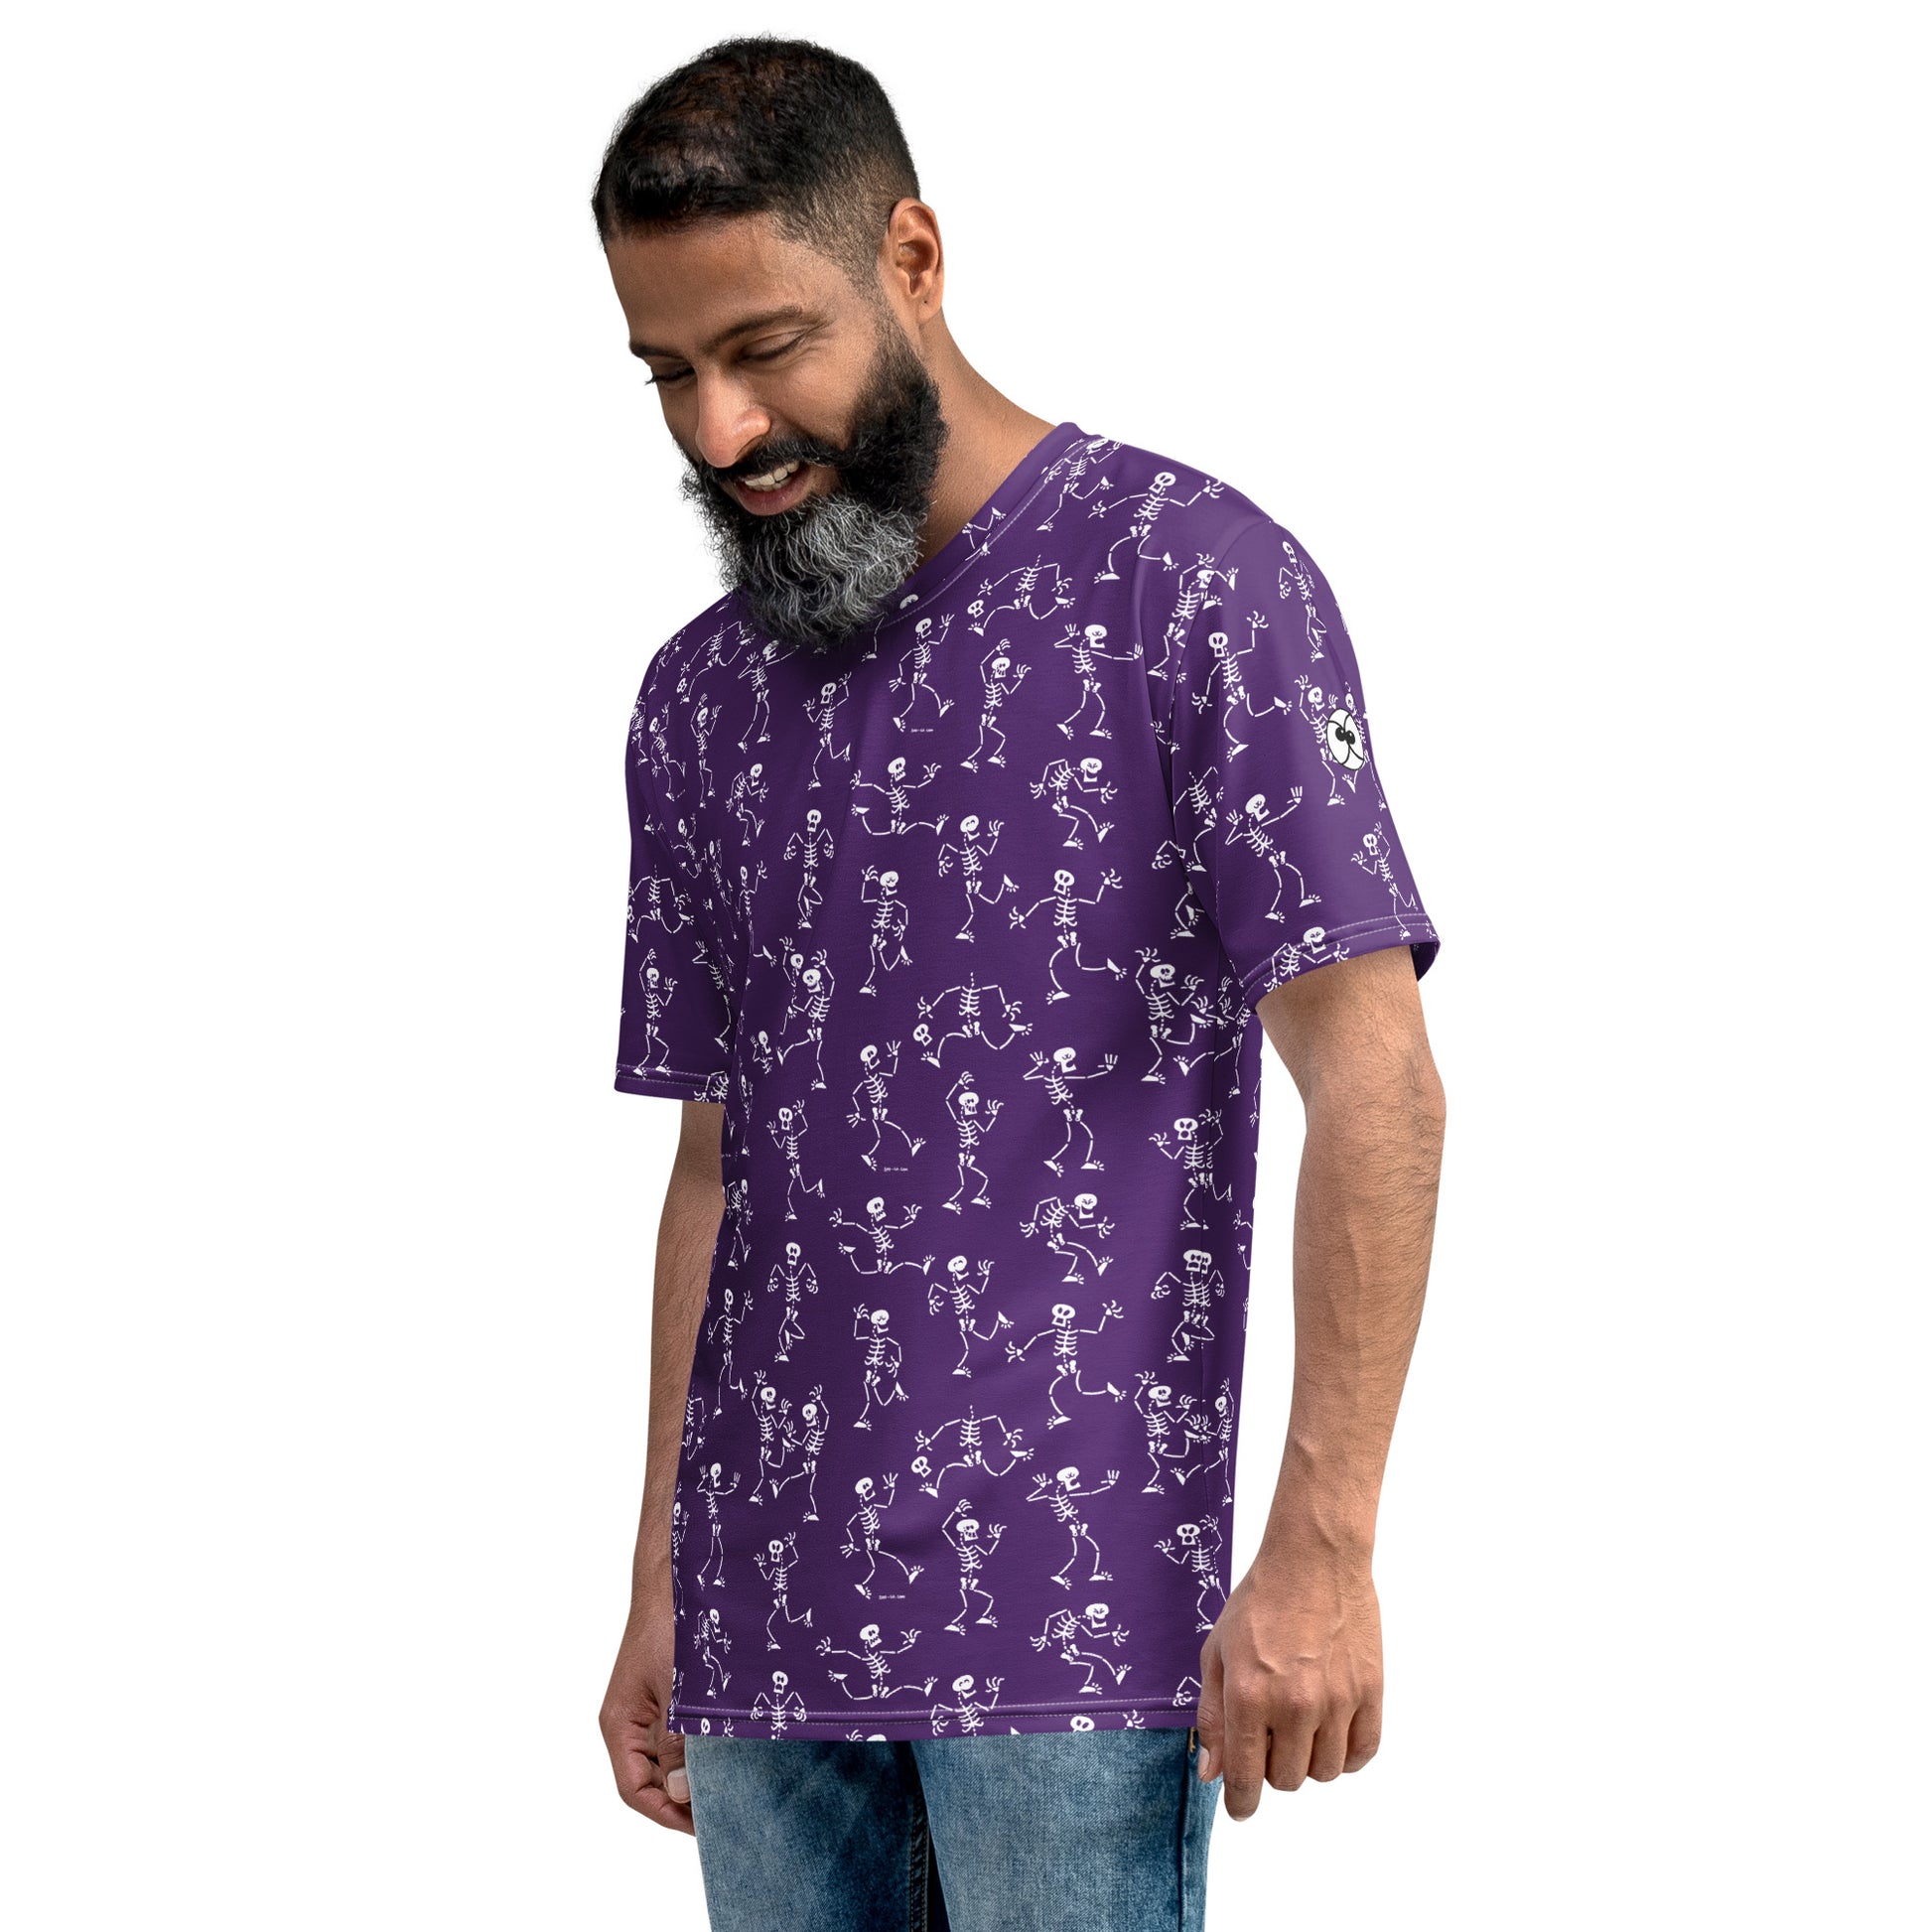 Fantastic skeletons having a great time at Halloween Men's t-shirt. Side view